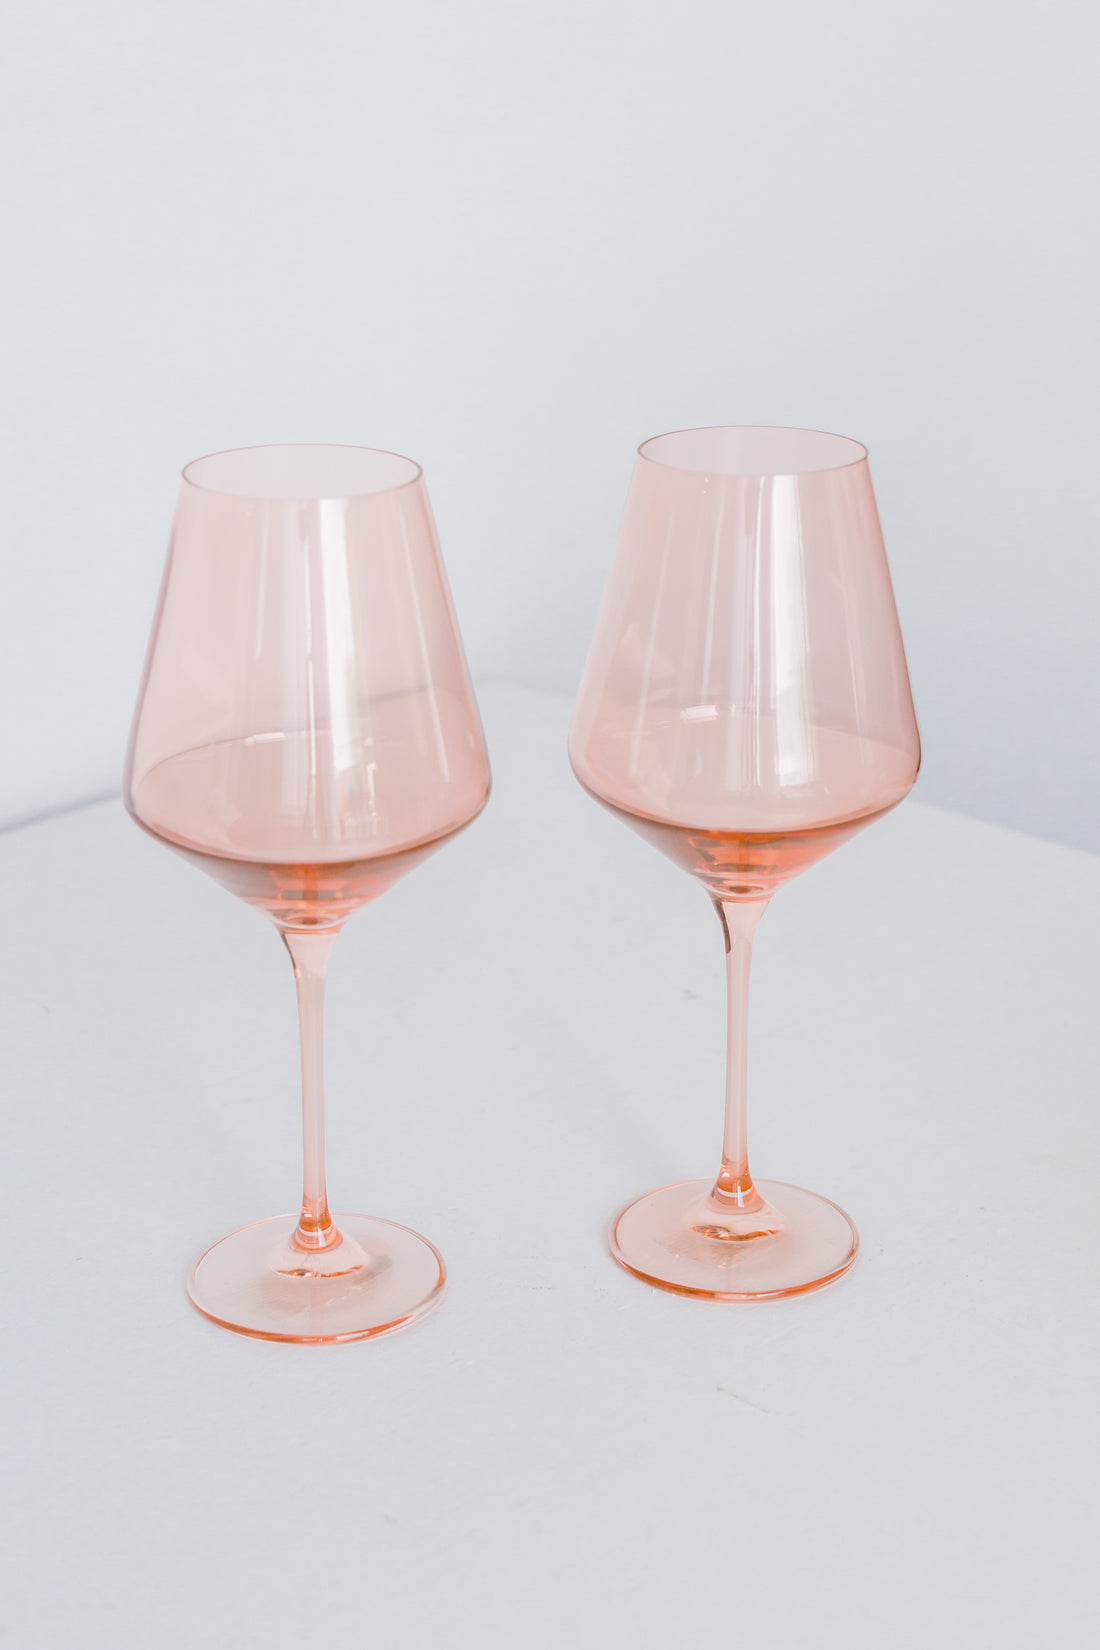 Stemmed Wine Glasses in Coral Peach Pink (set of 6) - Fieldshop by